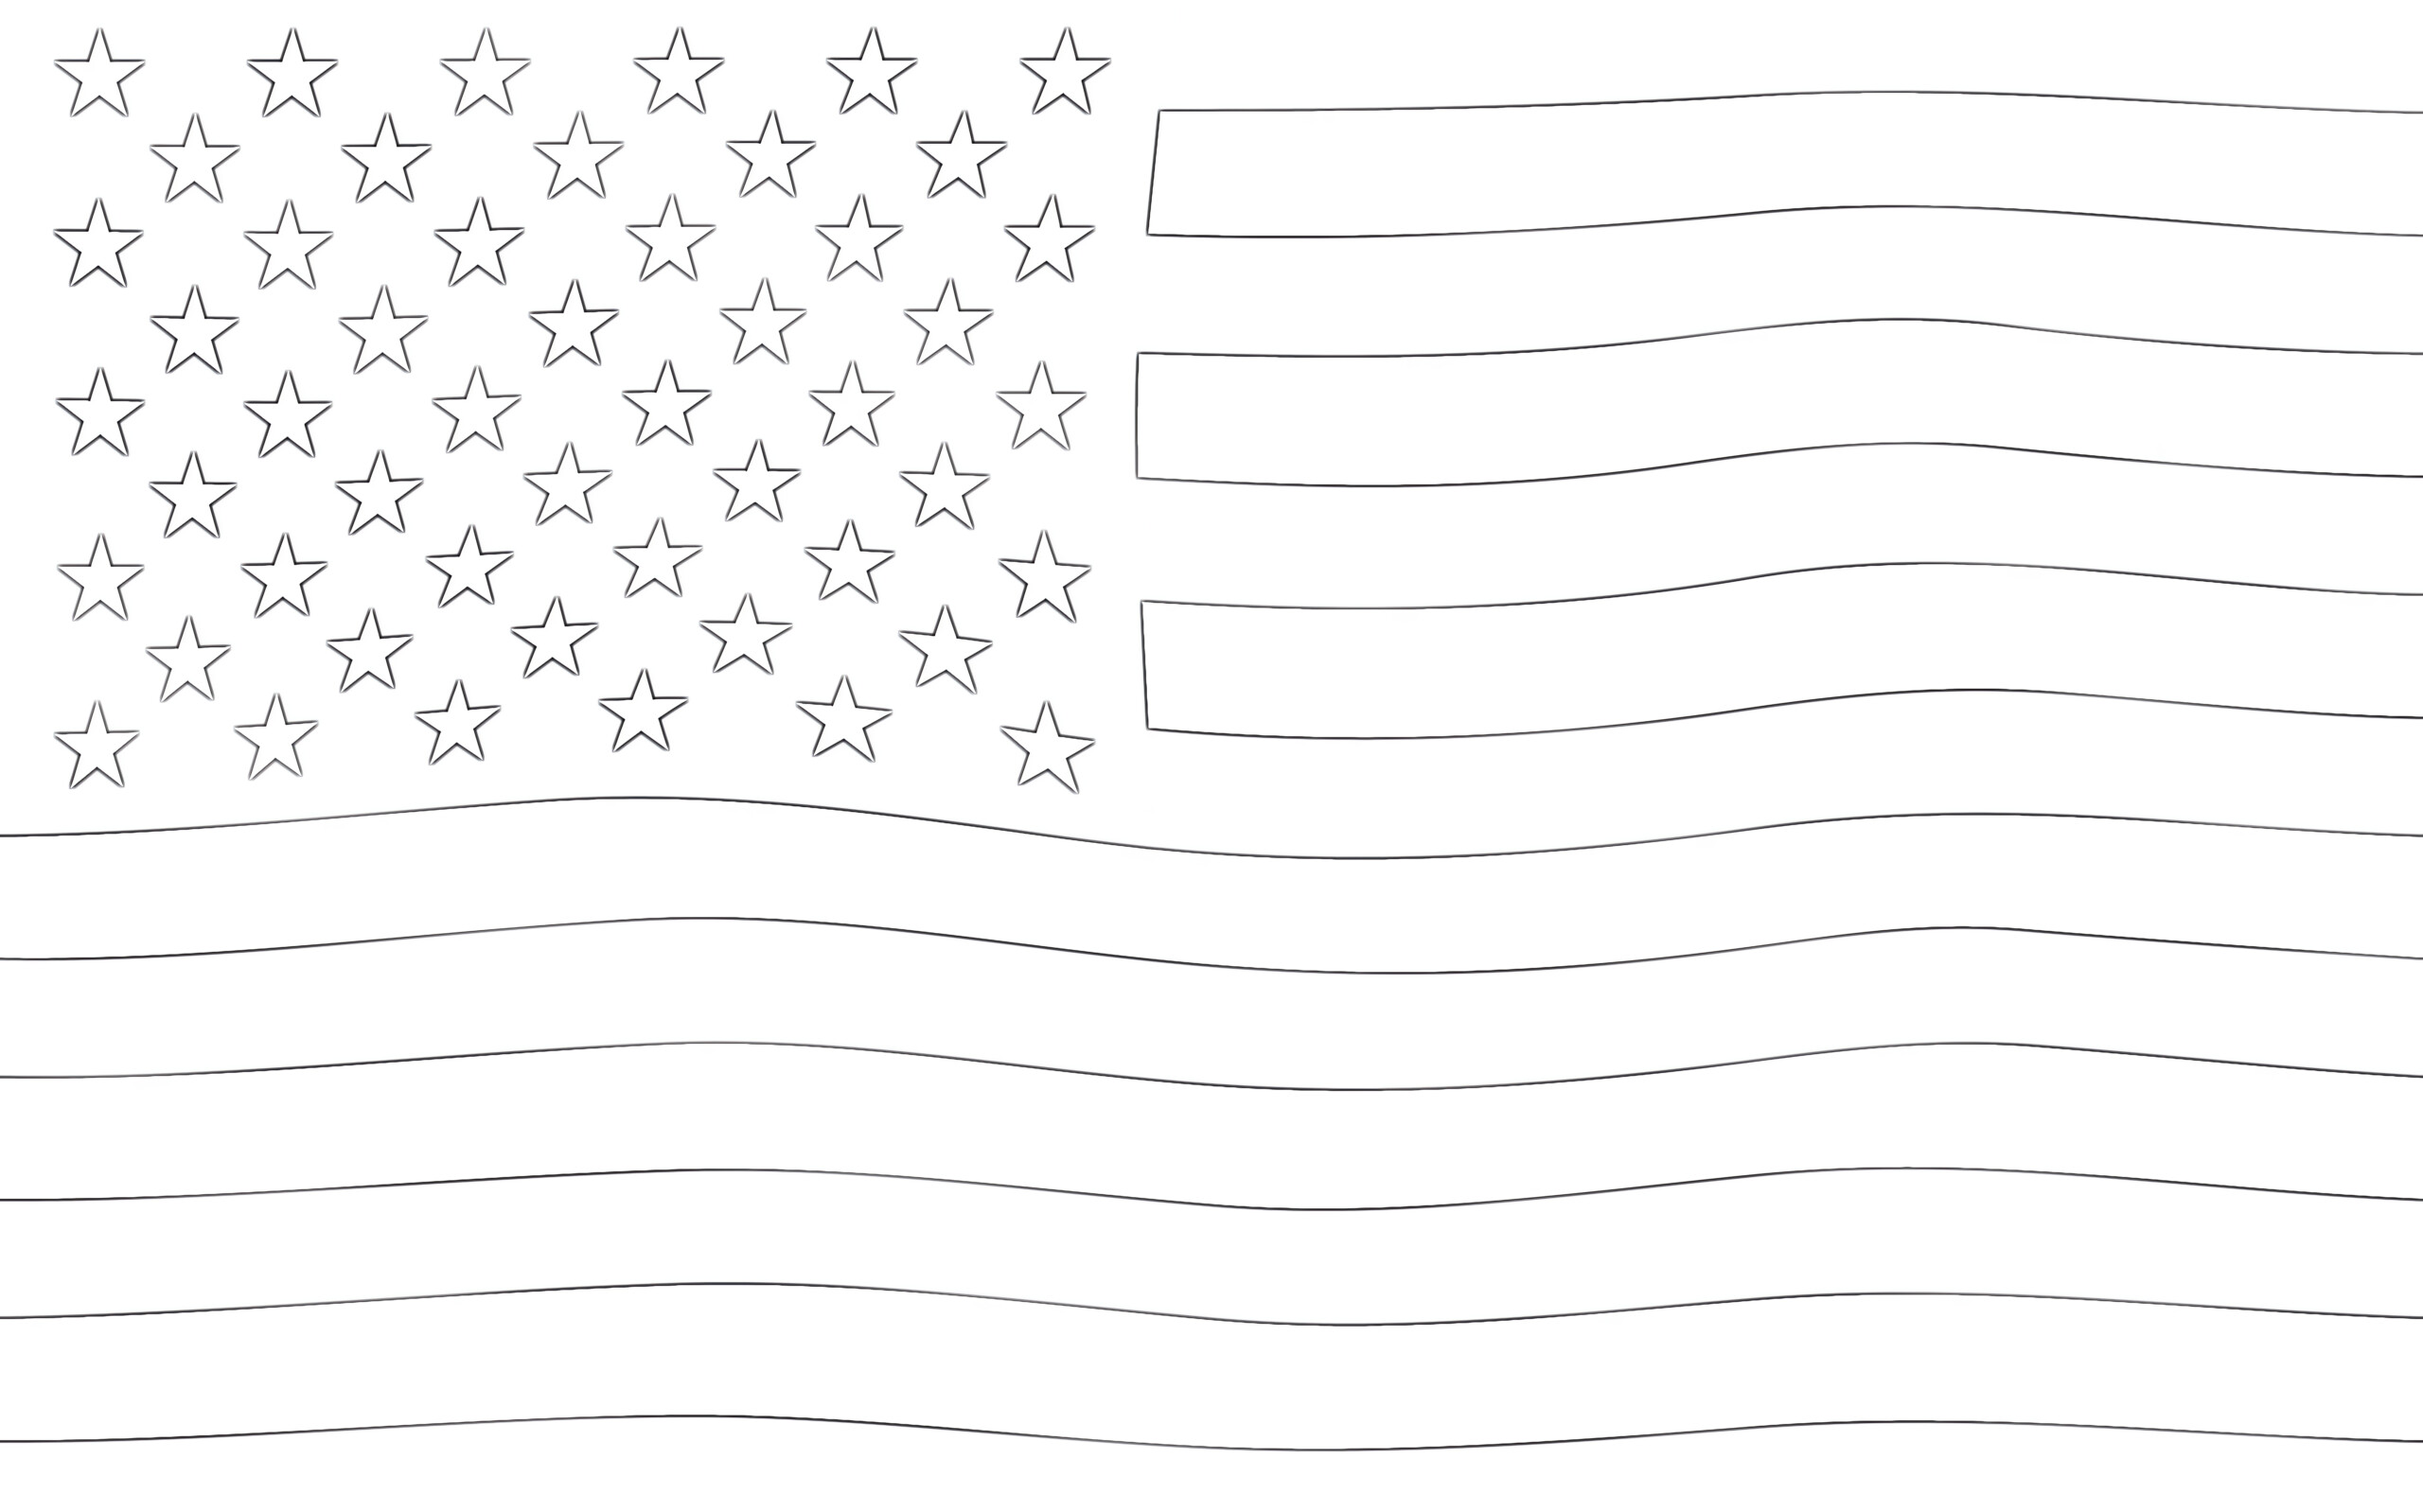 Flag Of USA - Coloring page